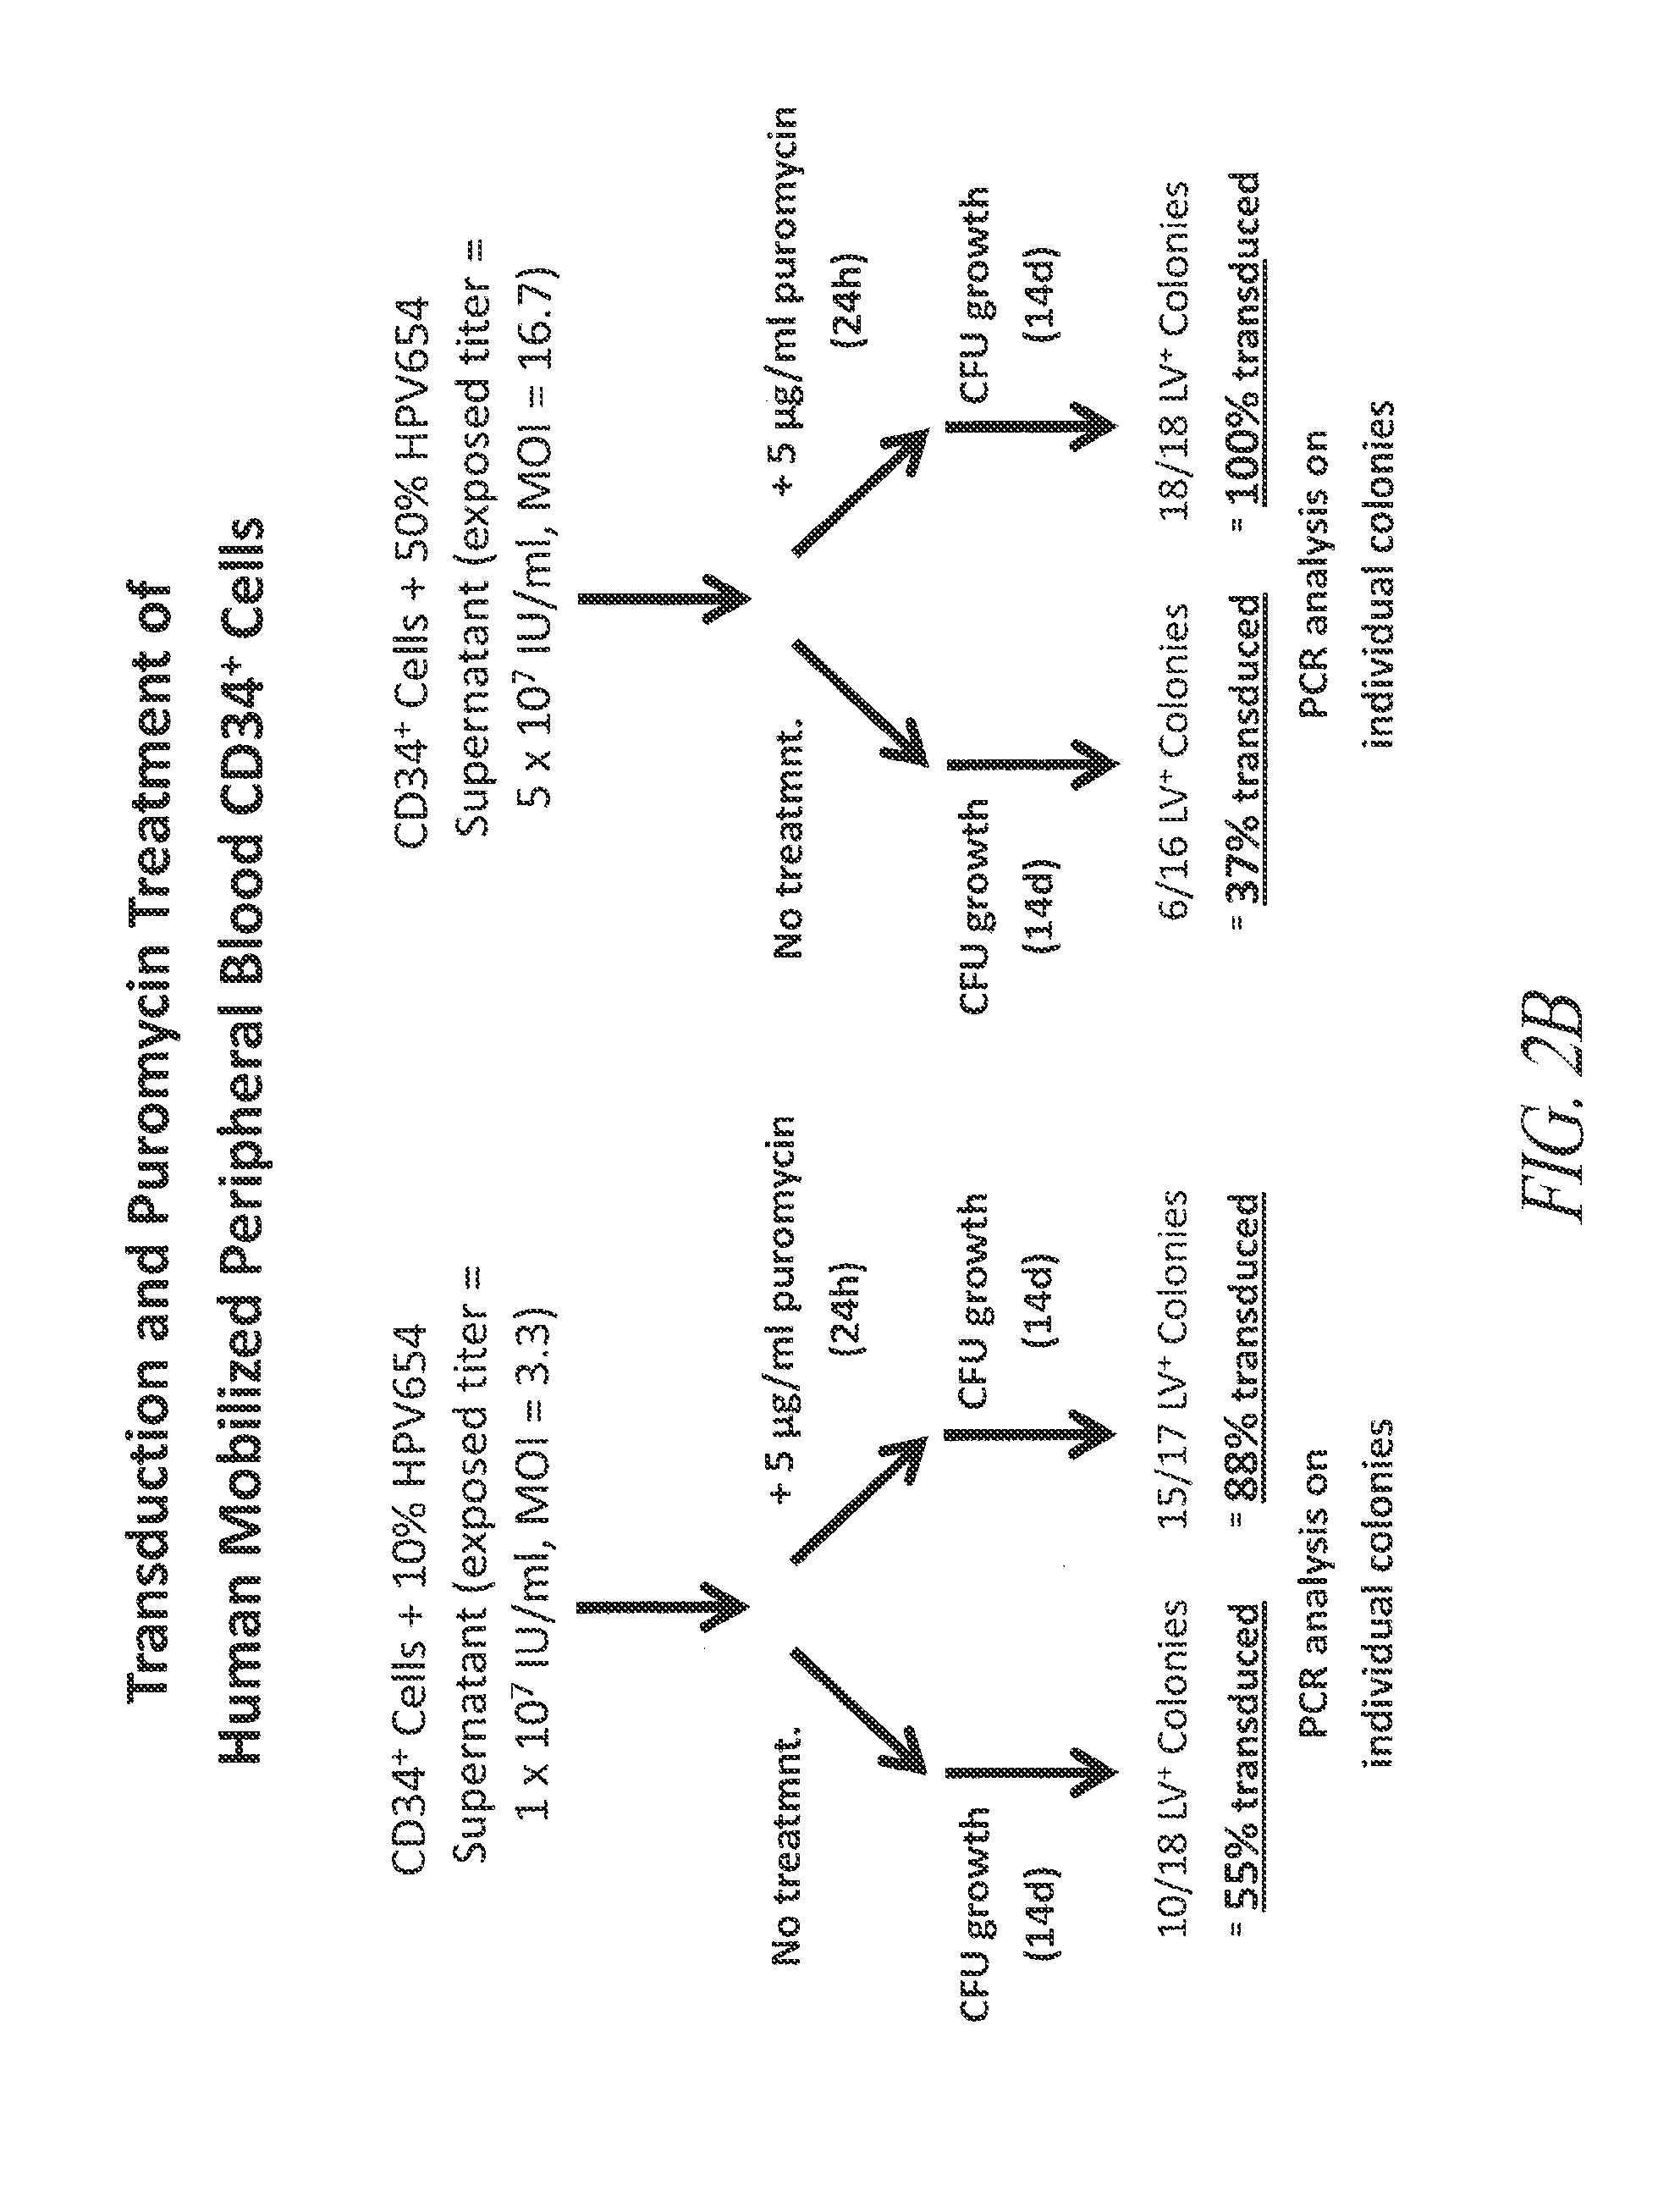 Methods for enhancing the delivery of gene-transduced cells